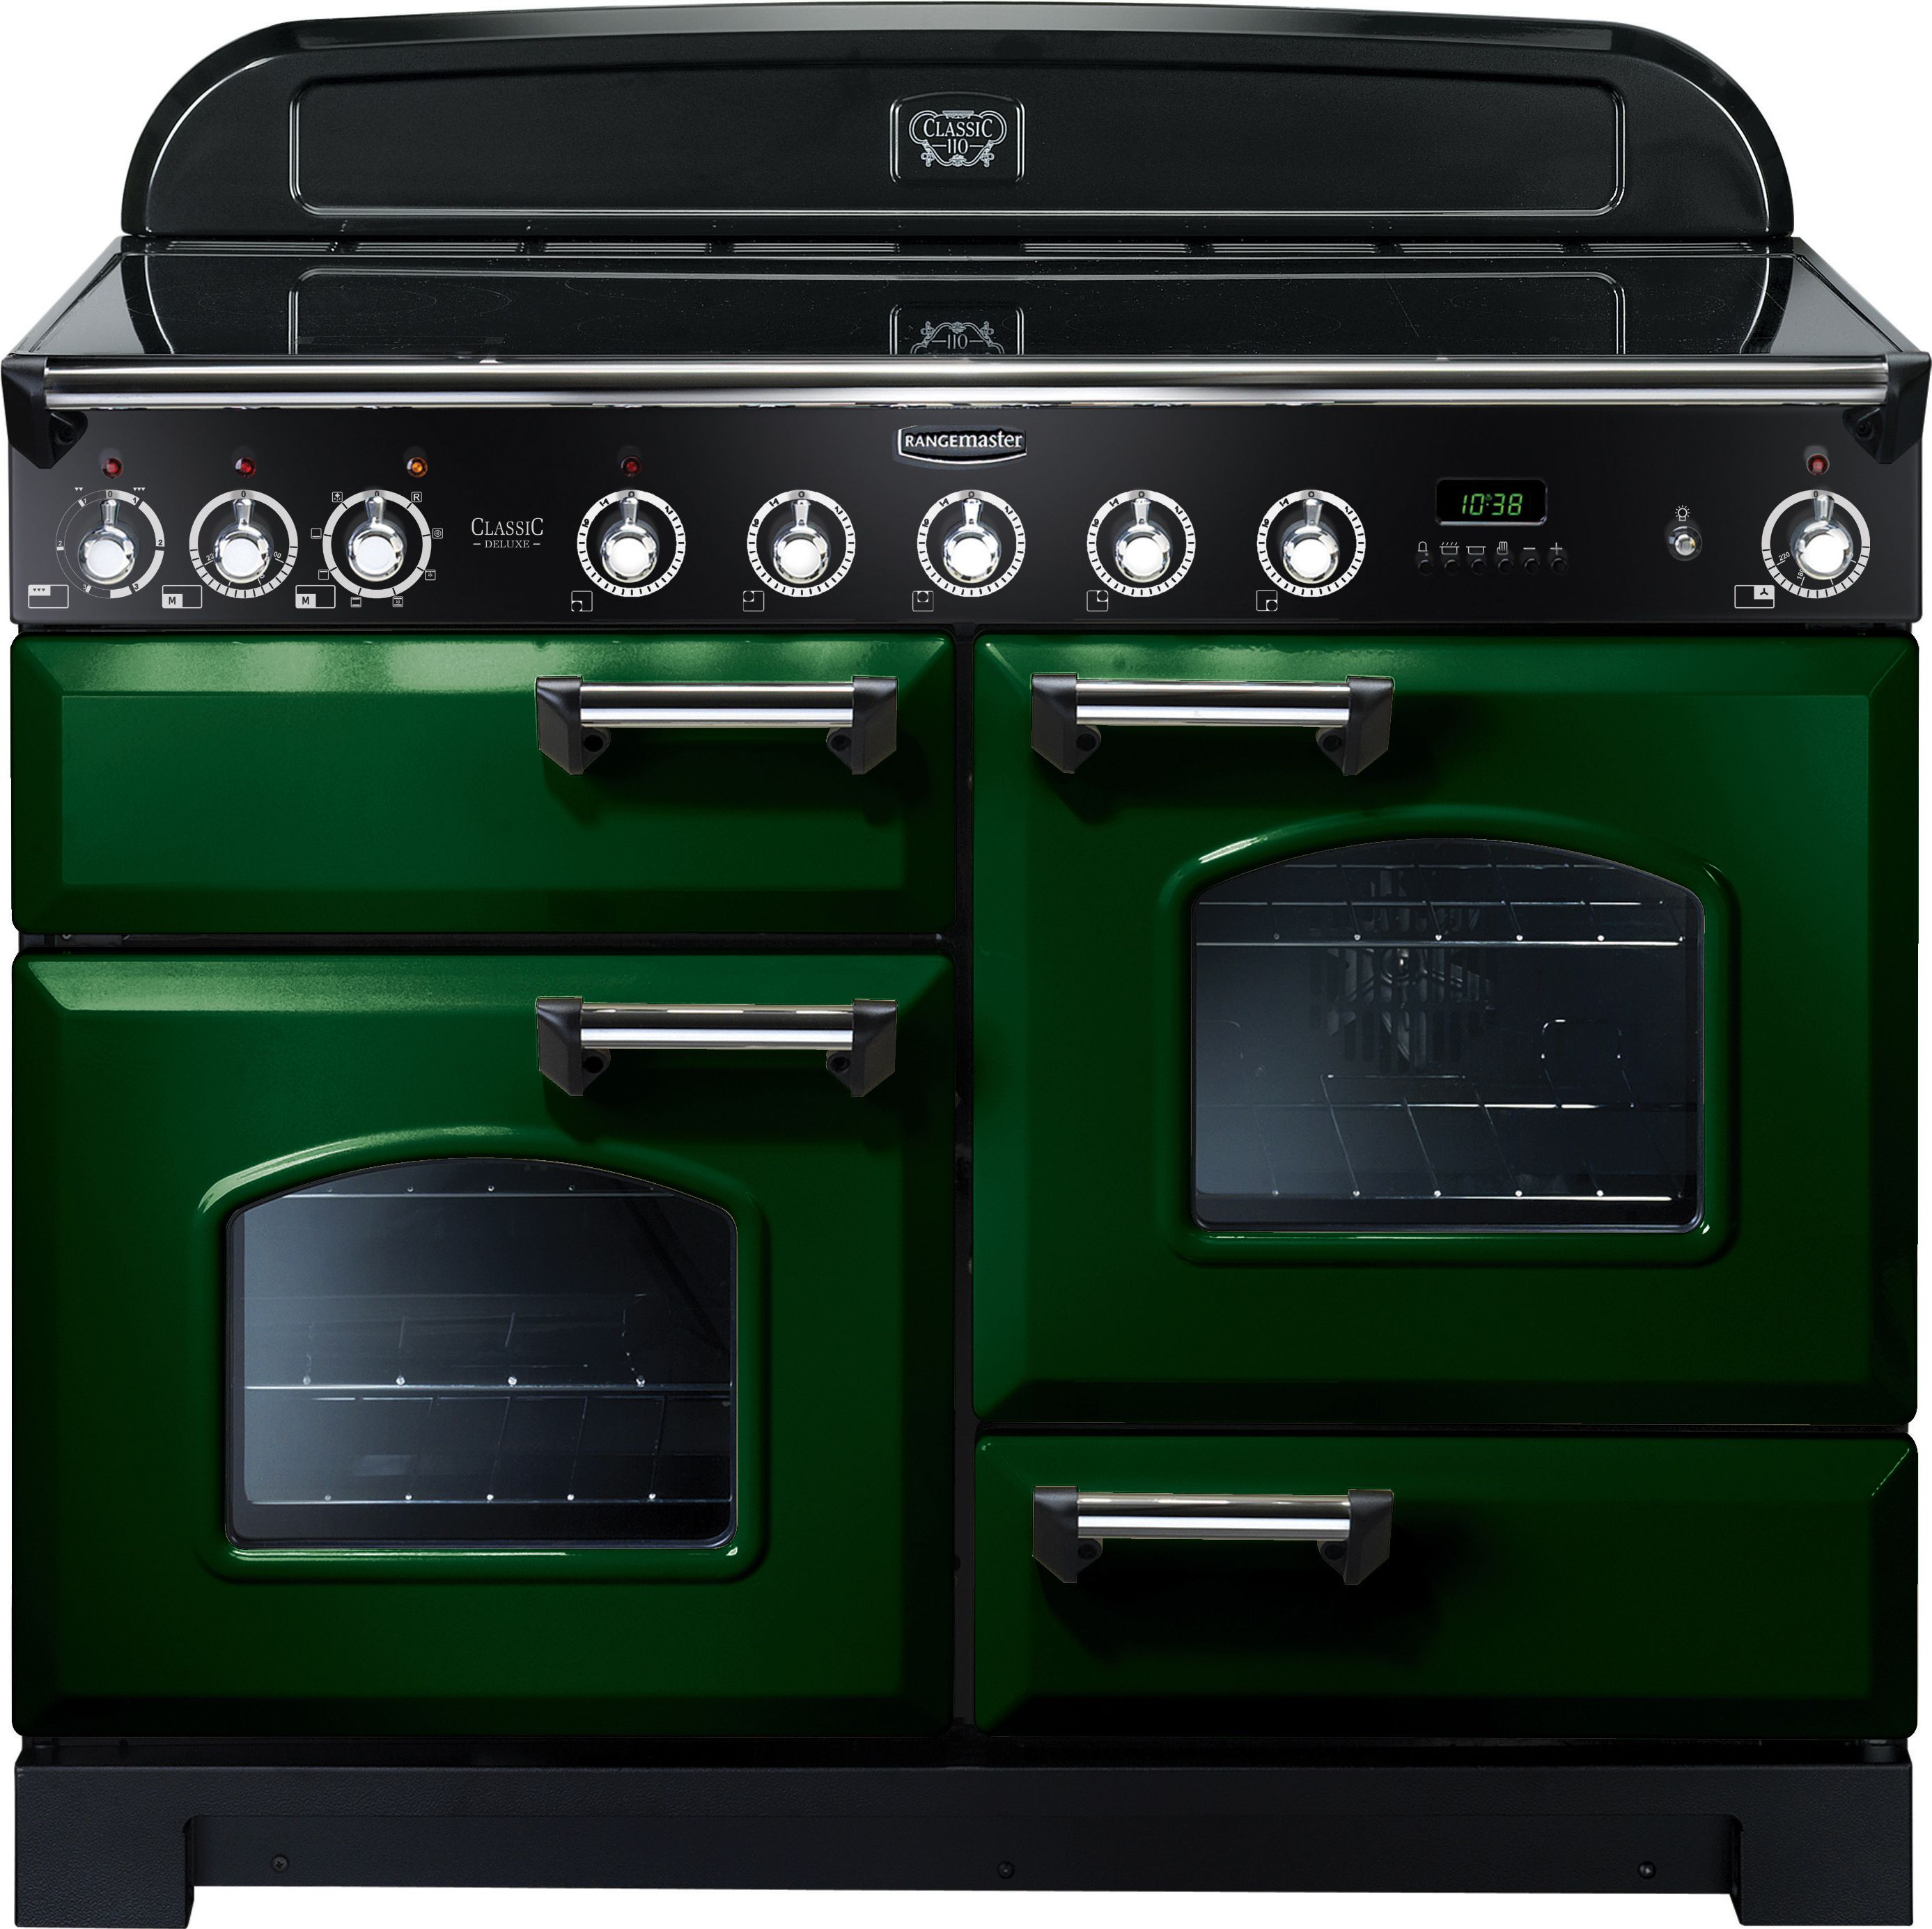 Rangemaster Classic Deluxe CDL110EIRG/C 110cm Electric Range Cooker with Induction Hob - Racing Green / Chrome - A/A Rated, Green